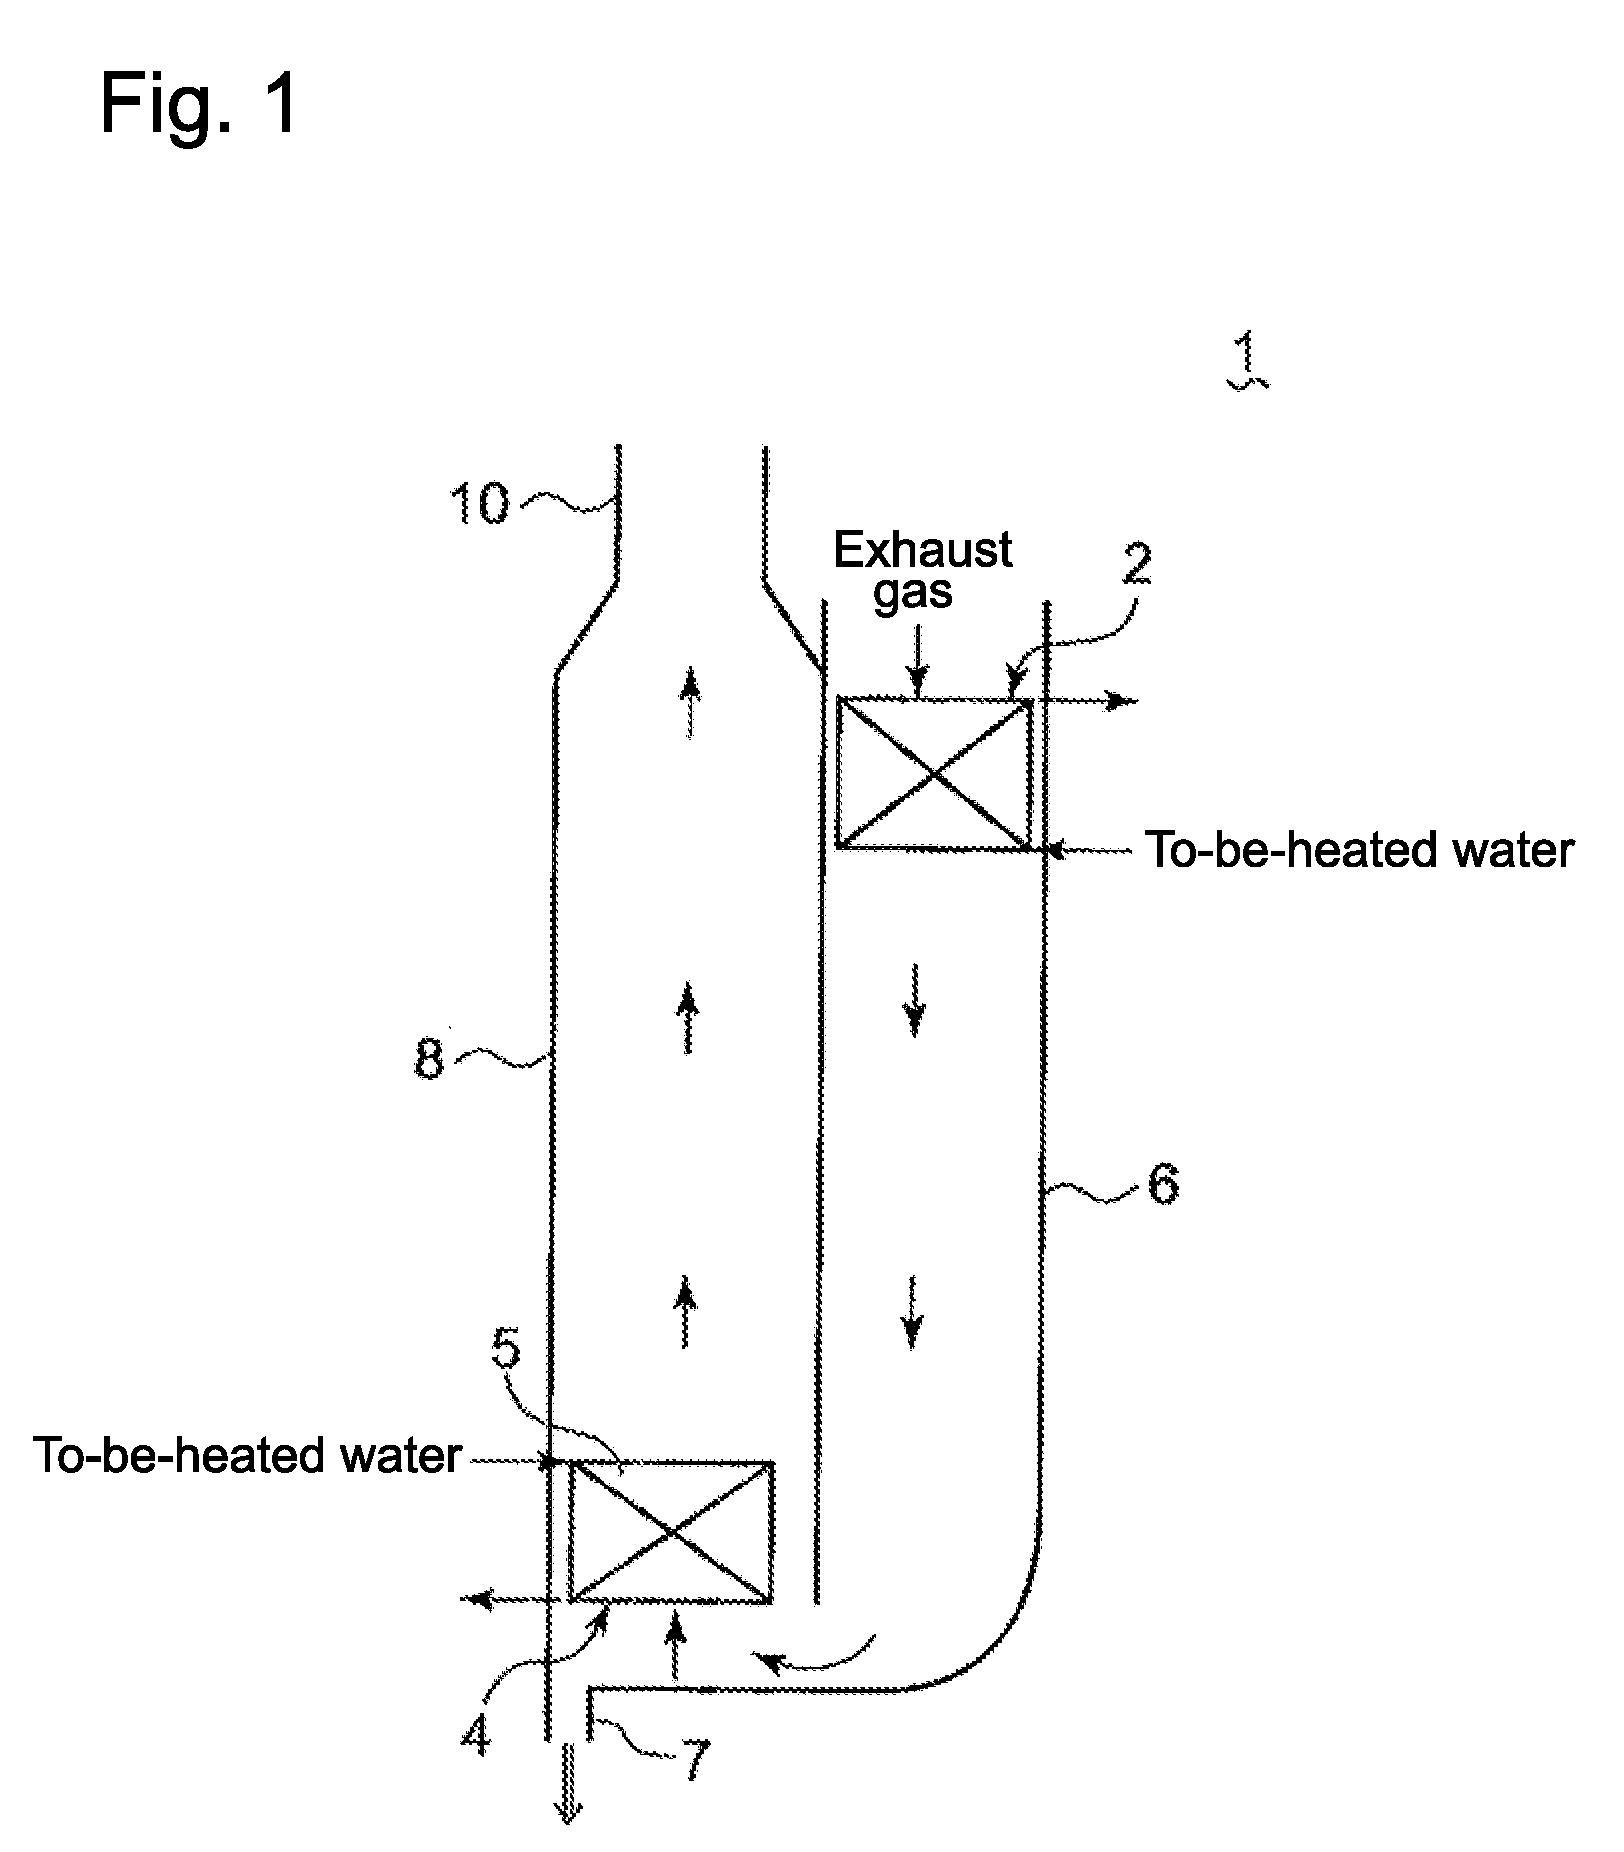 Device for recovering residual heat from exhaust gas